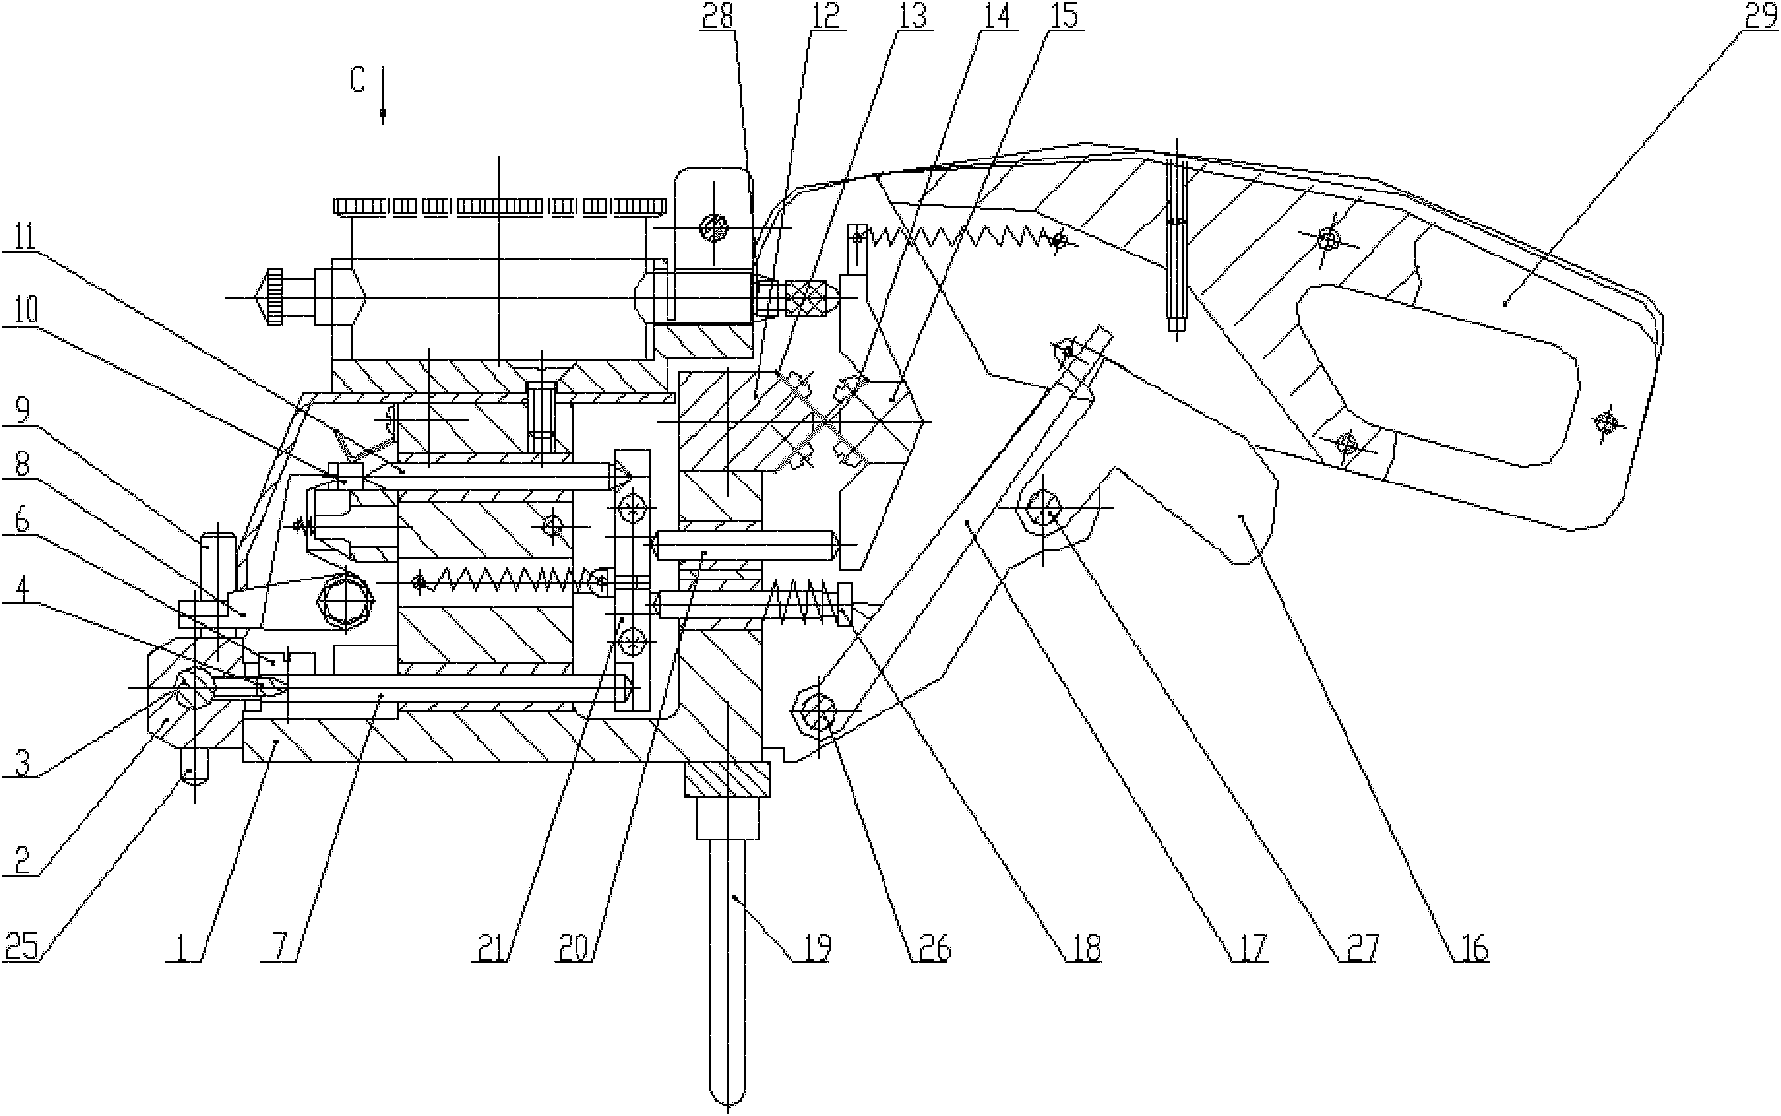 Measuring device for exhaust area of engine turbine guider throat